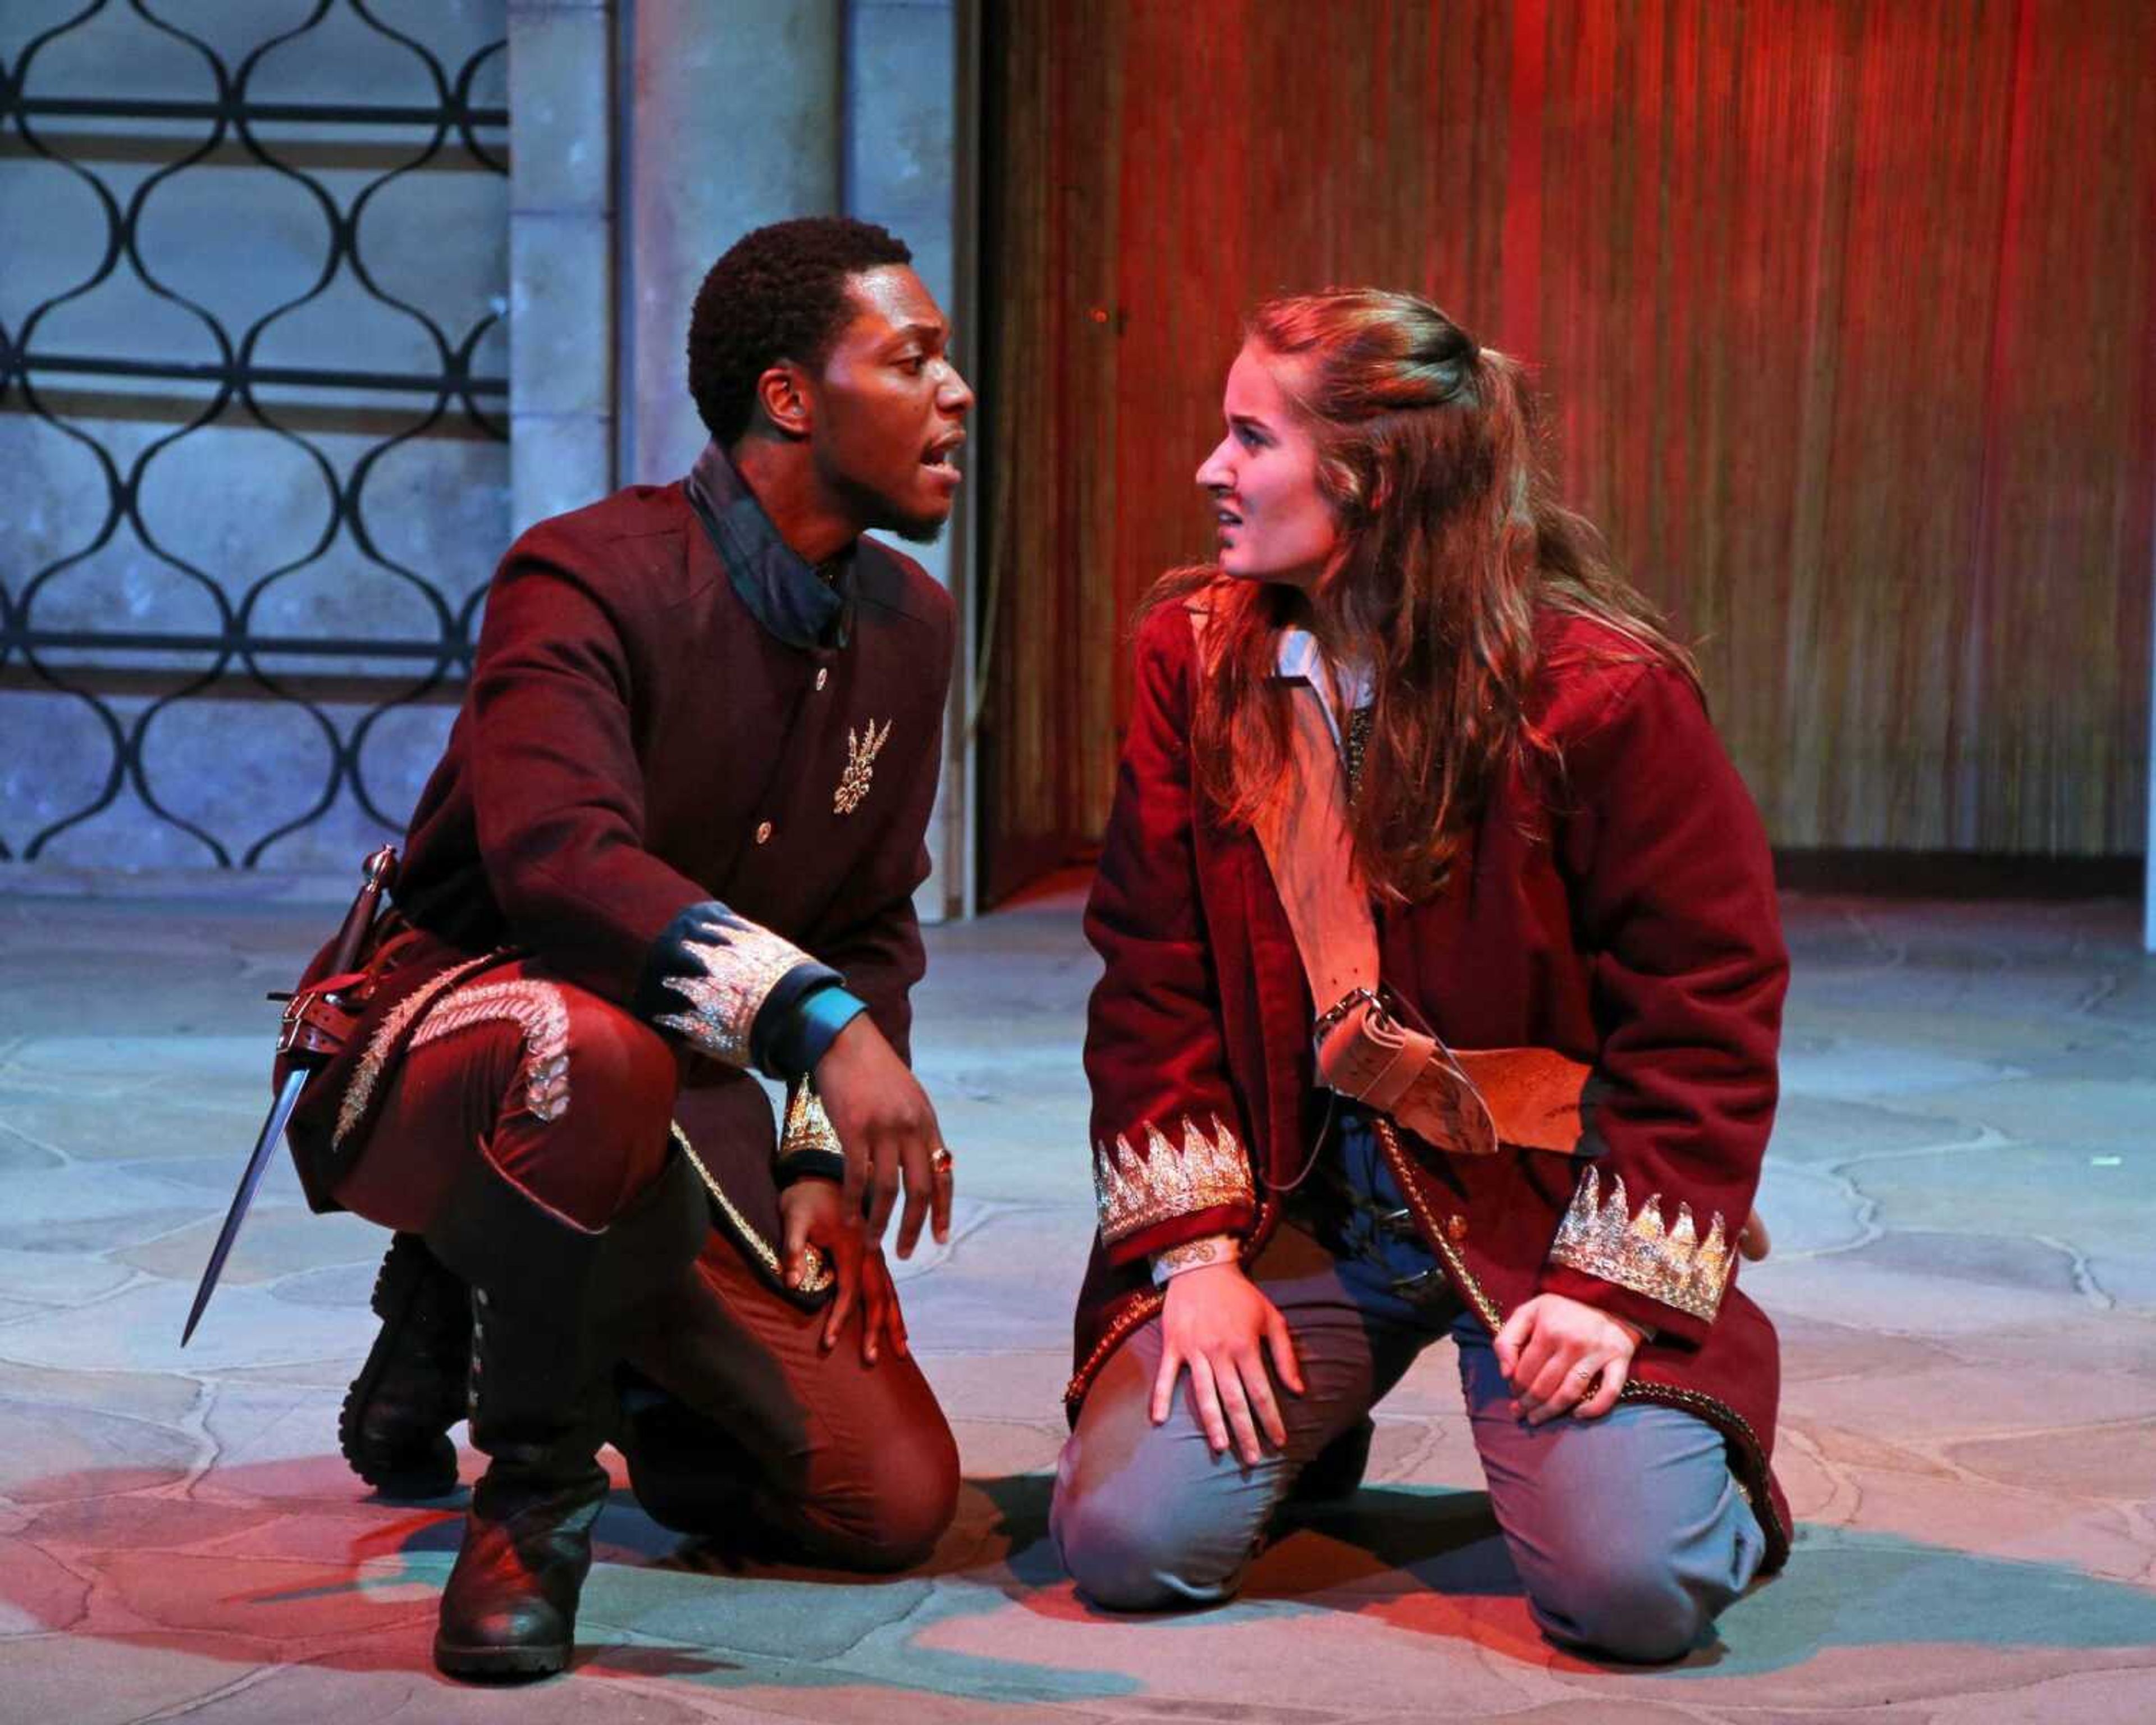 Senior Jay Wade, playing Iago, and senior Alex Burke, playing Cassio, in the River Campus’ production of “Othello” which premiered April 24.